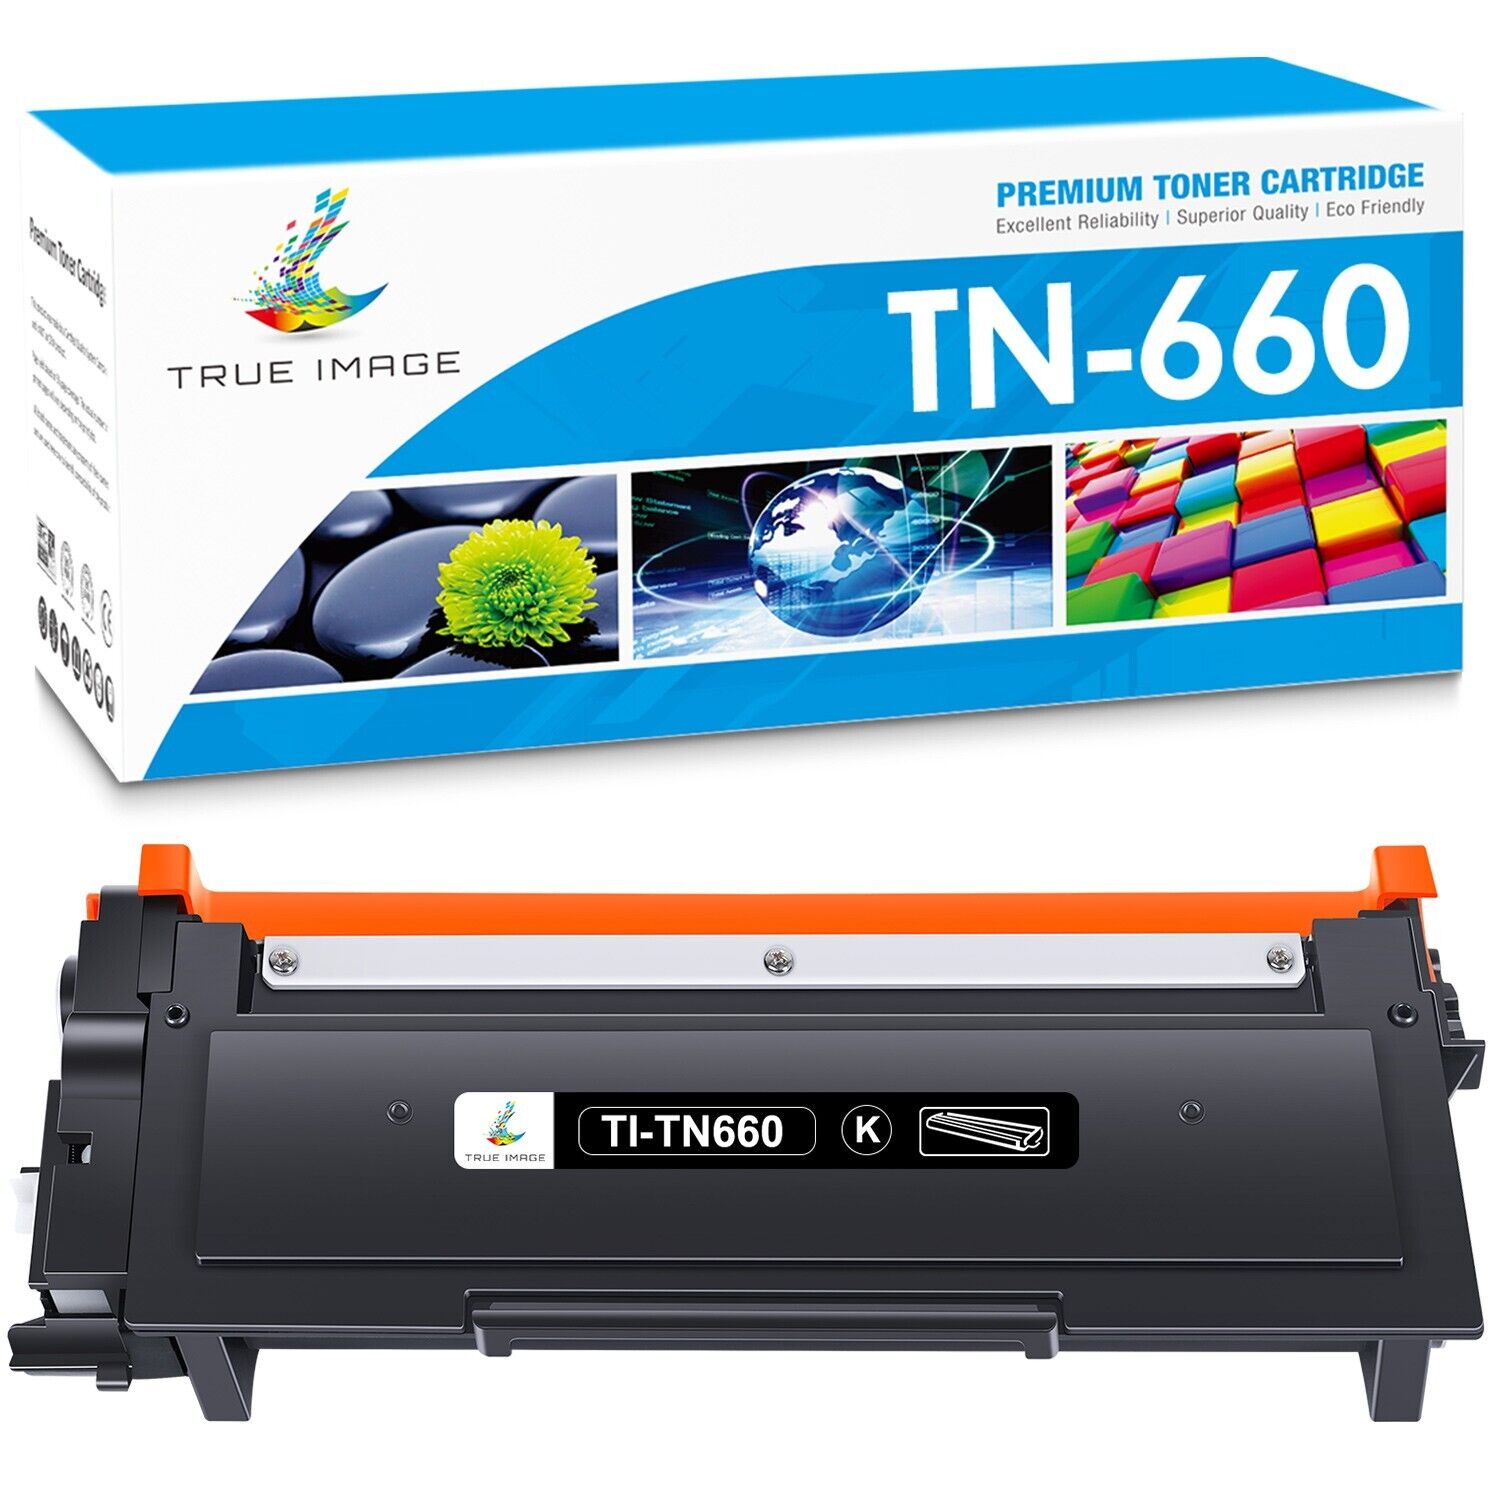 1 Pack TN660 High Yield Black Toner Cartridge for Brother MFC-L2700DW L2740DW